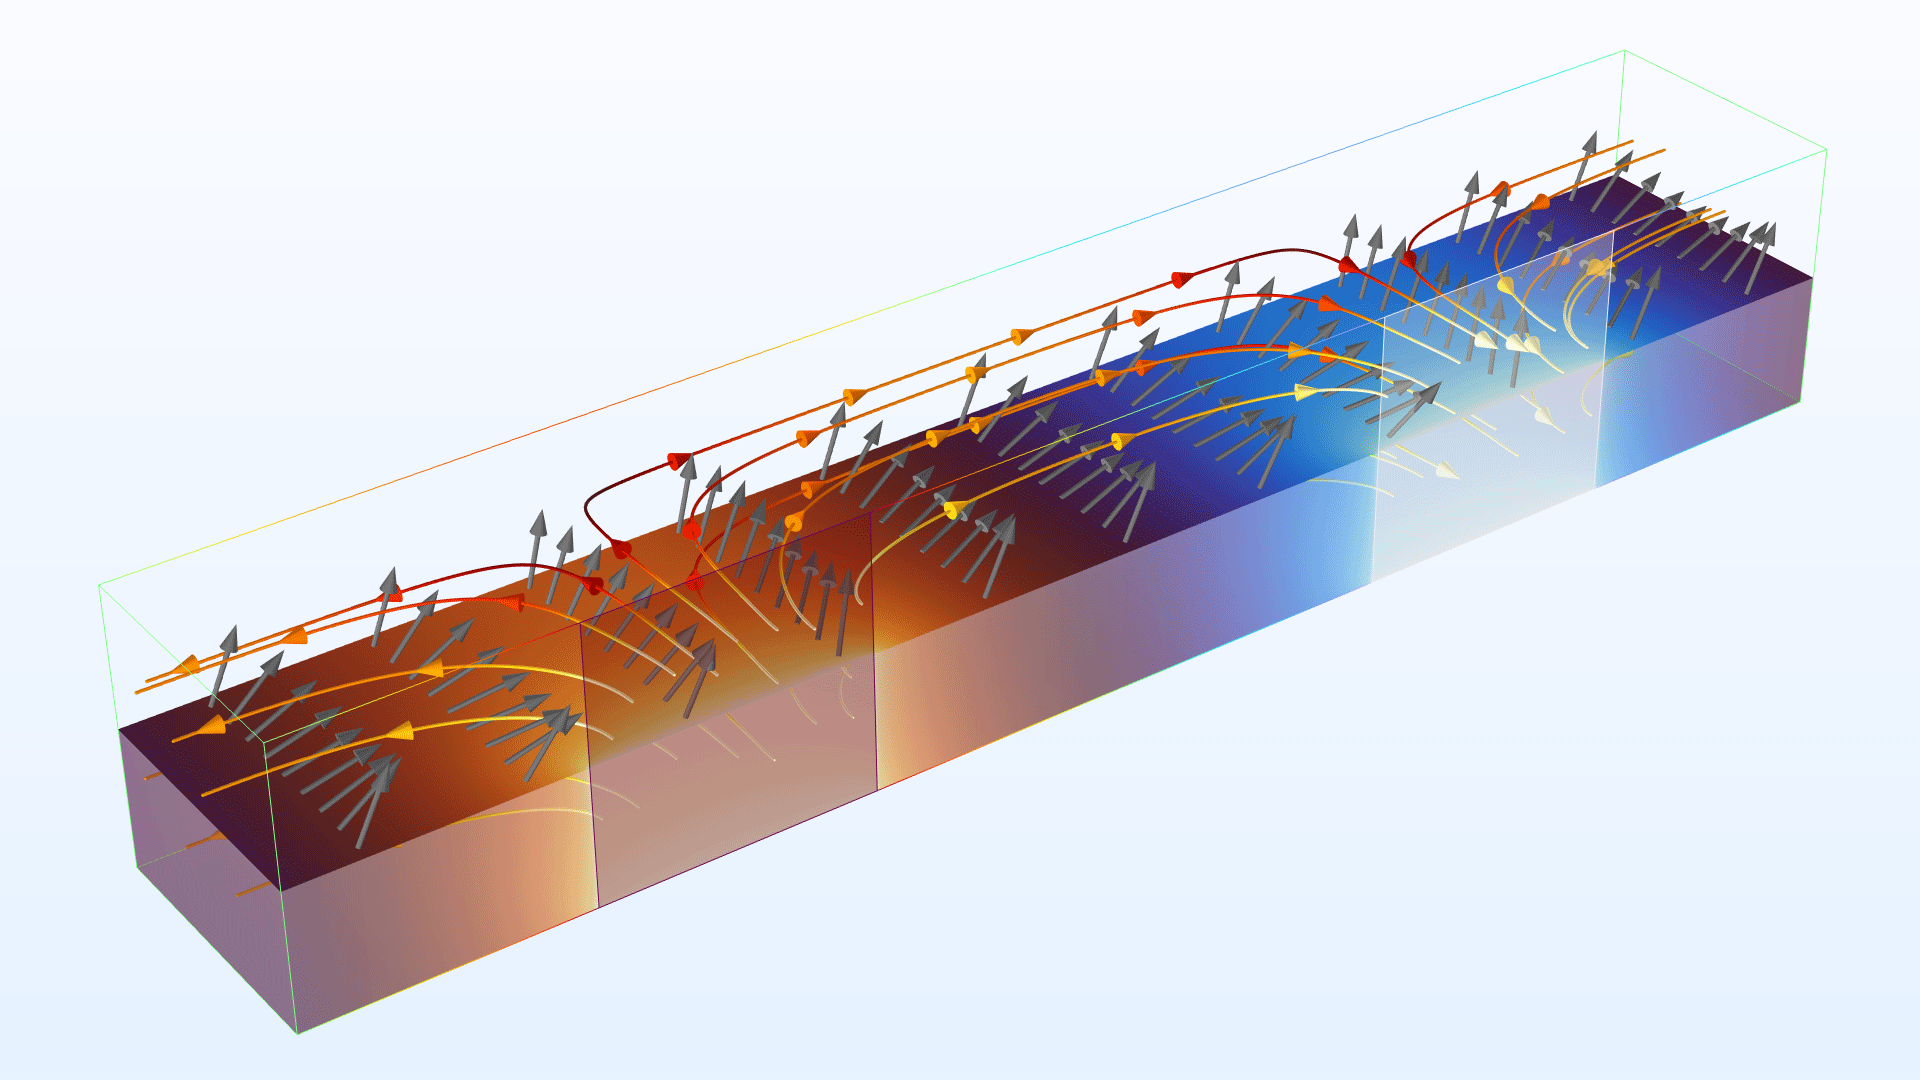 A nematic liquid crystal model showing the electric potential distribution in the Thermal Wave color table and the electric field with a streamline plot in the Thermal color table.